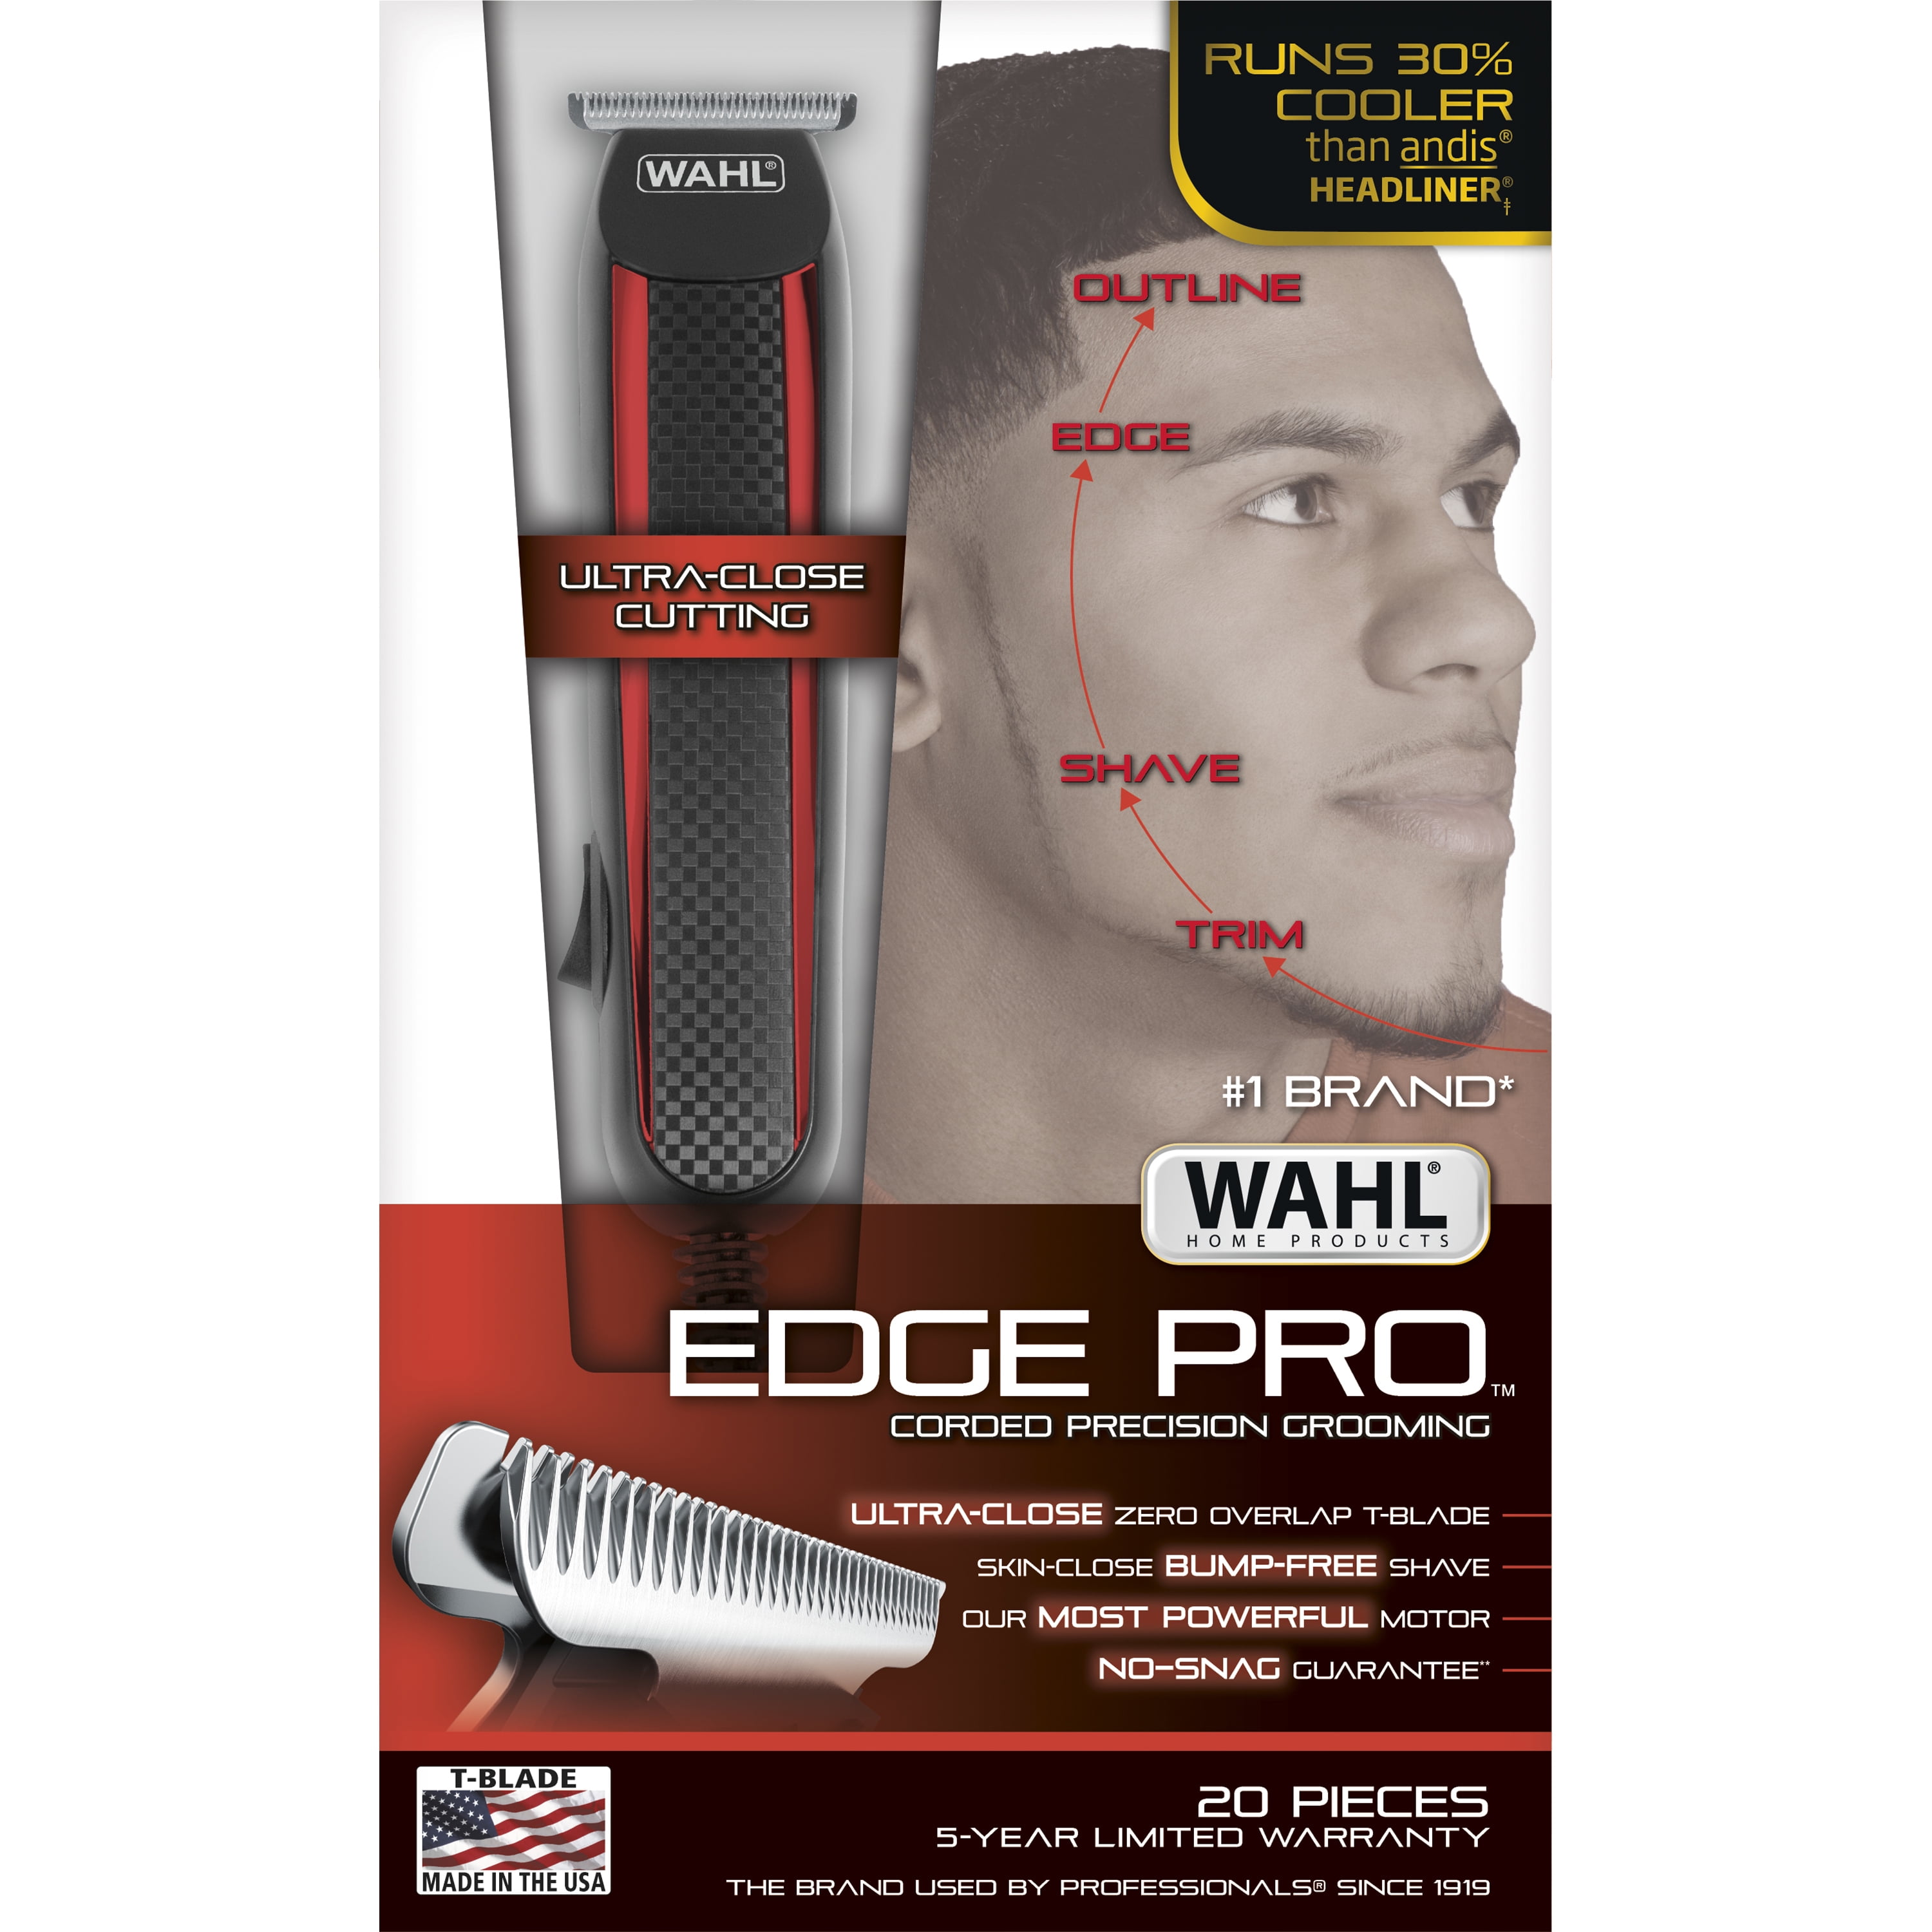 wahl t styler review